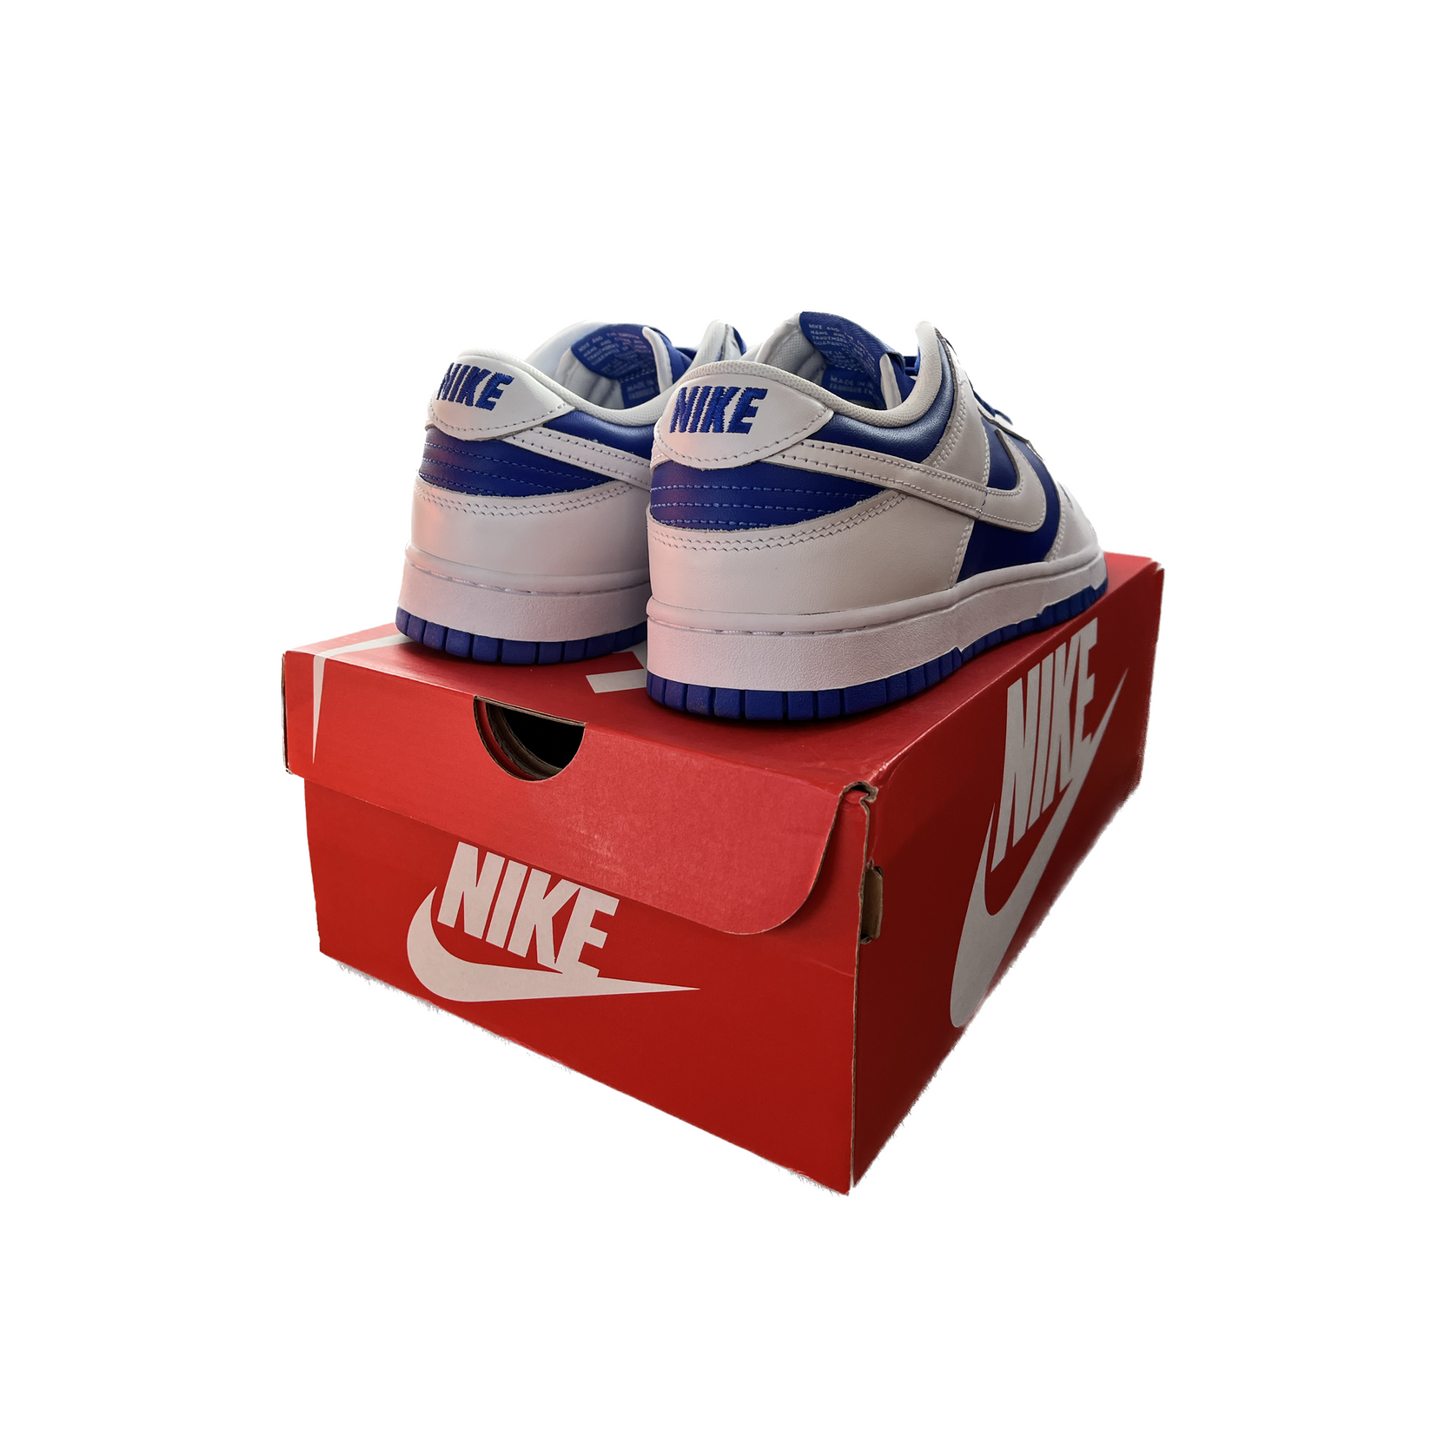 Nike Dunk Low Racer Blue - The Global Hype